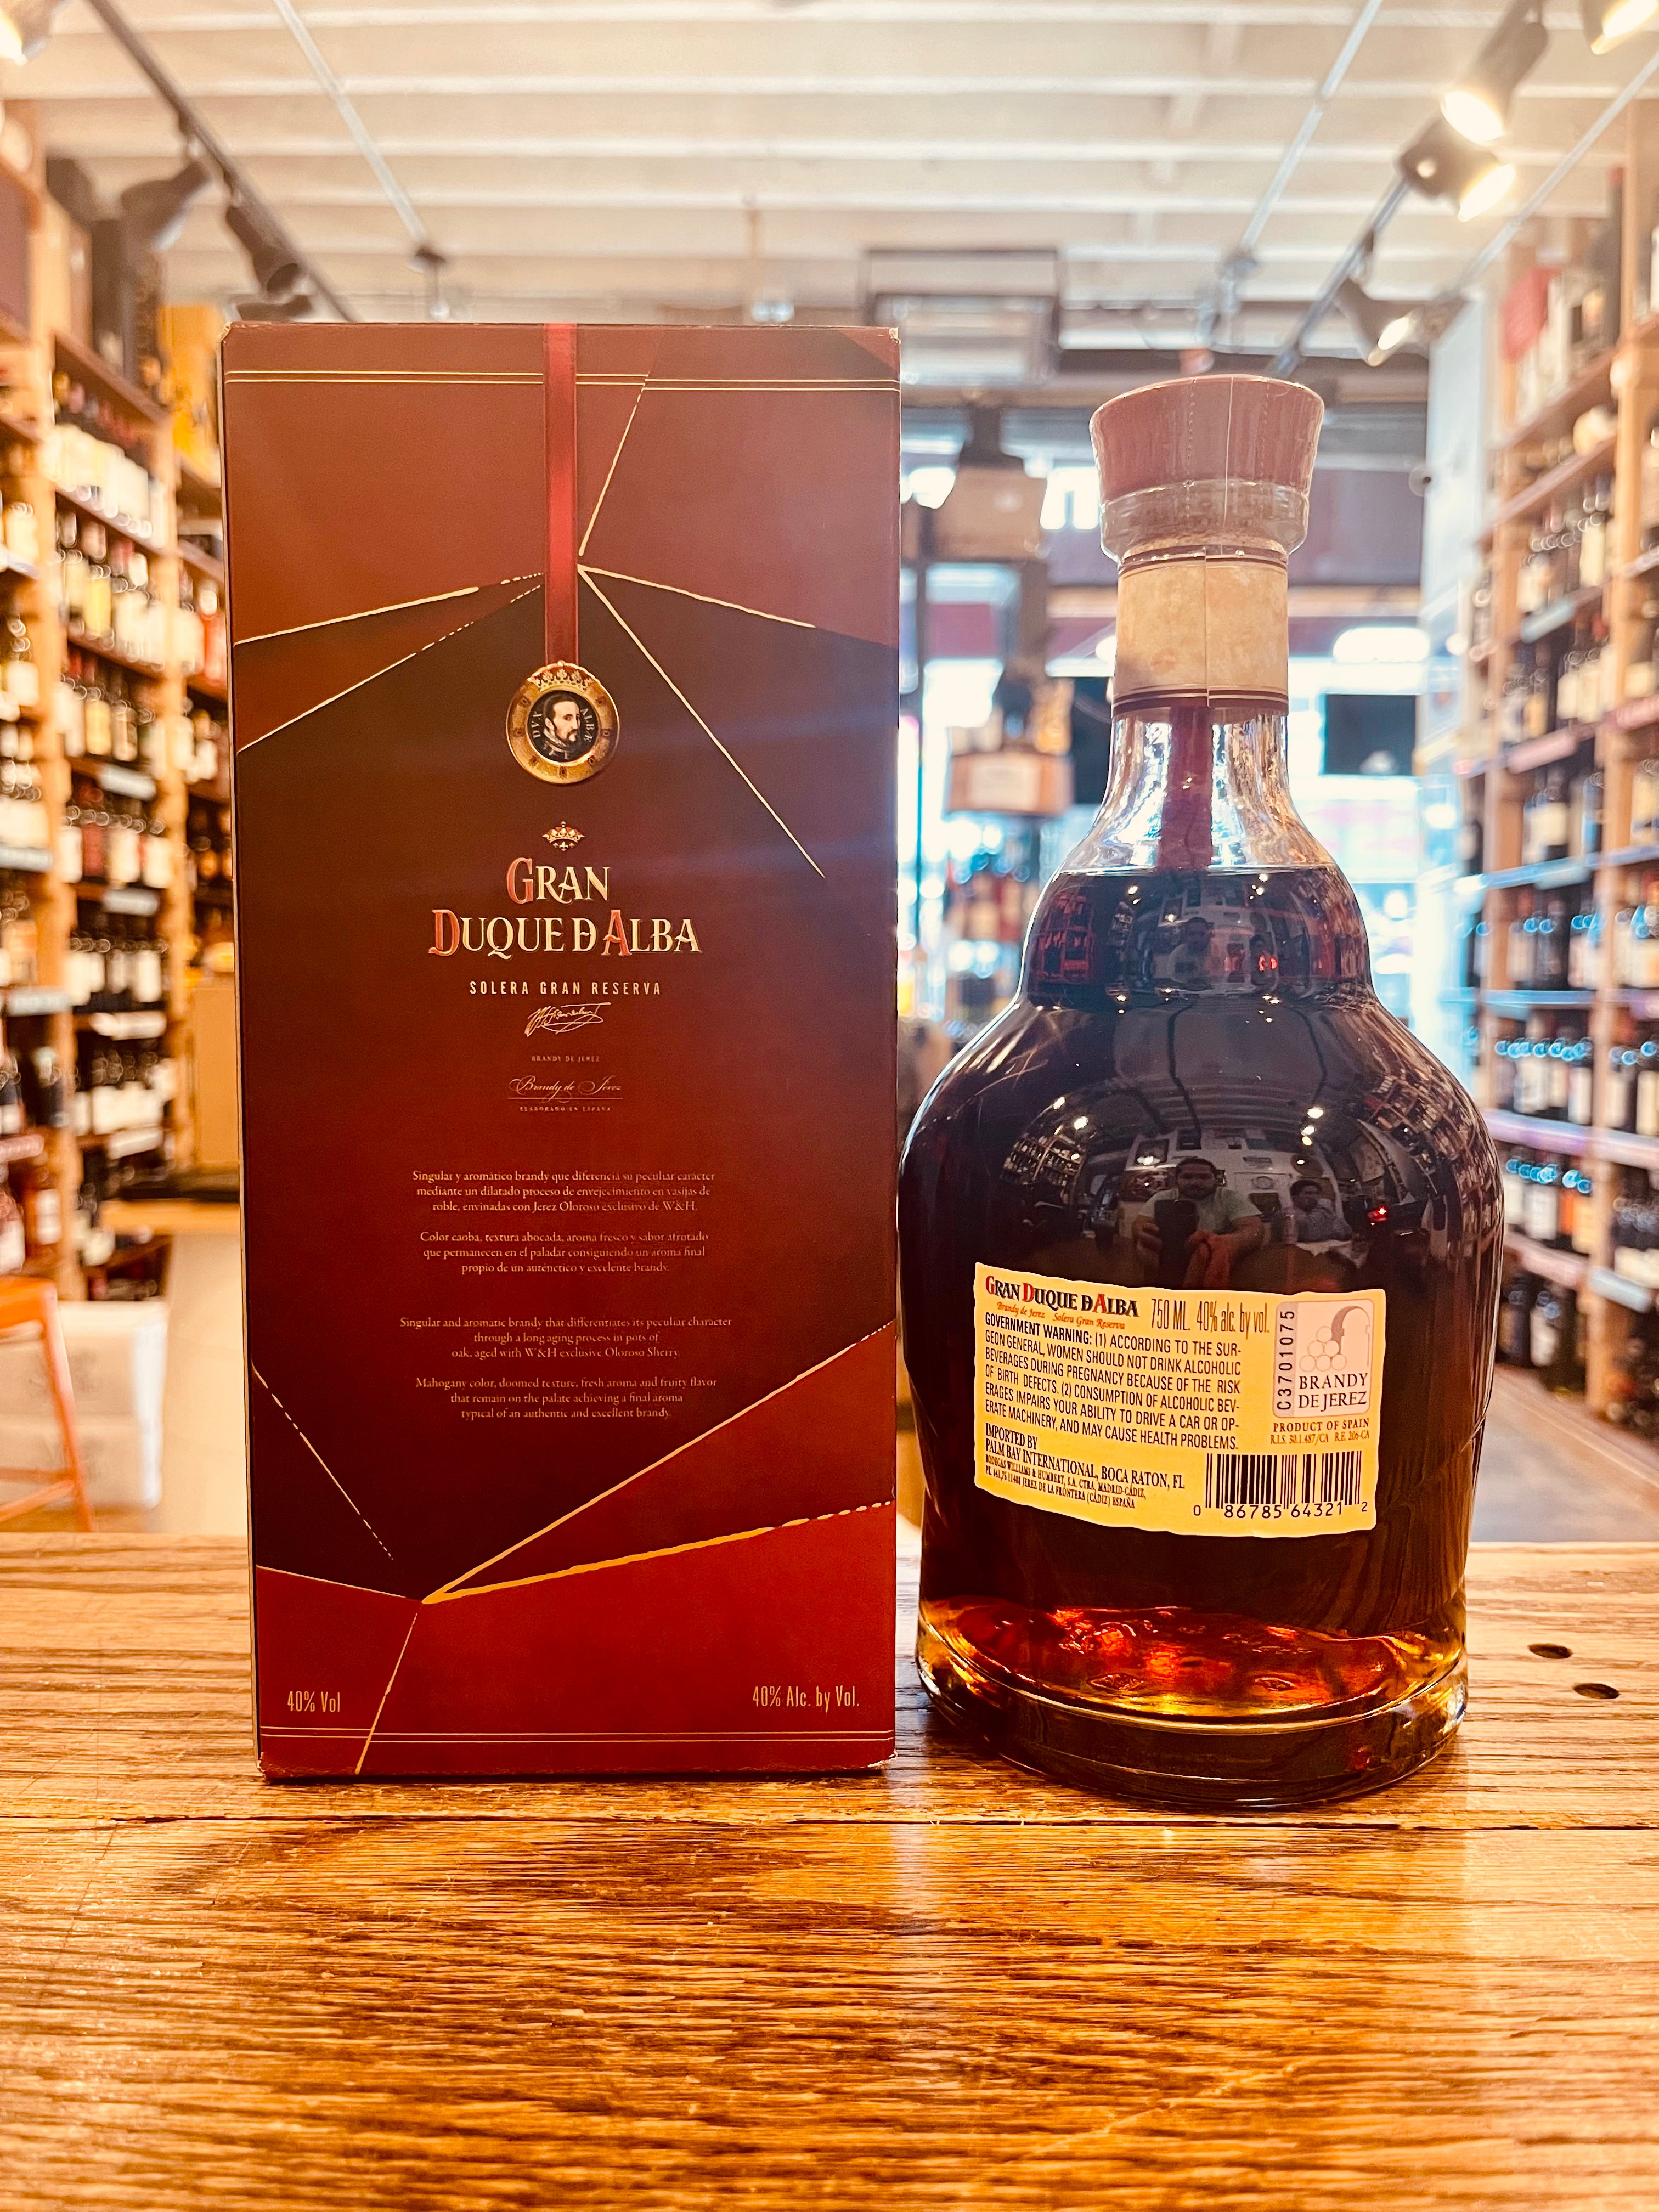 Gran Duque D'Alba Gran Reseva 750mL the backside of a red box with the image of a man's face on it next to a small squat rounded clear bottle with a yellow label and red top